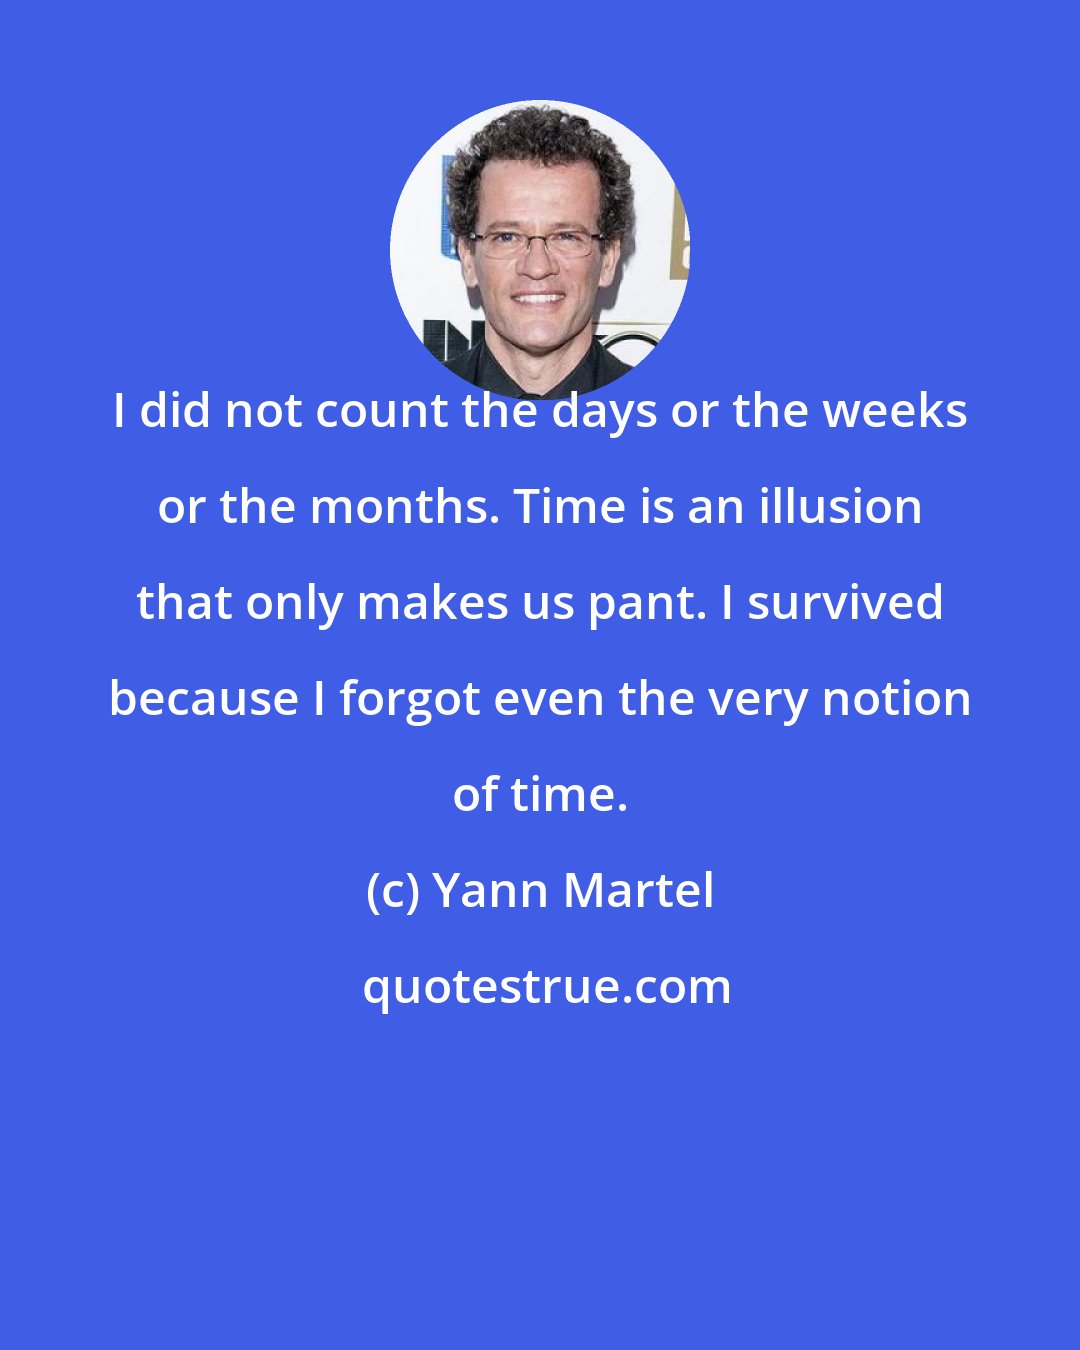 Yann Martel: I did not count the days or the weeks or the months. Time is an illusion that only makes us pant. I survived because I forgot even the very notion of time.